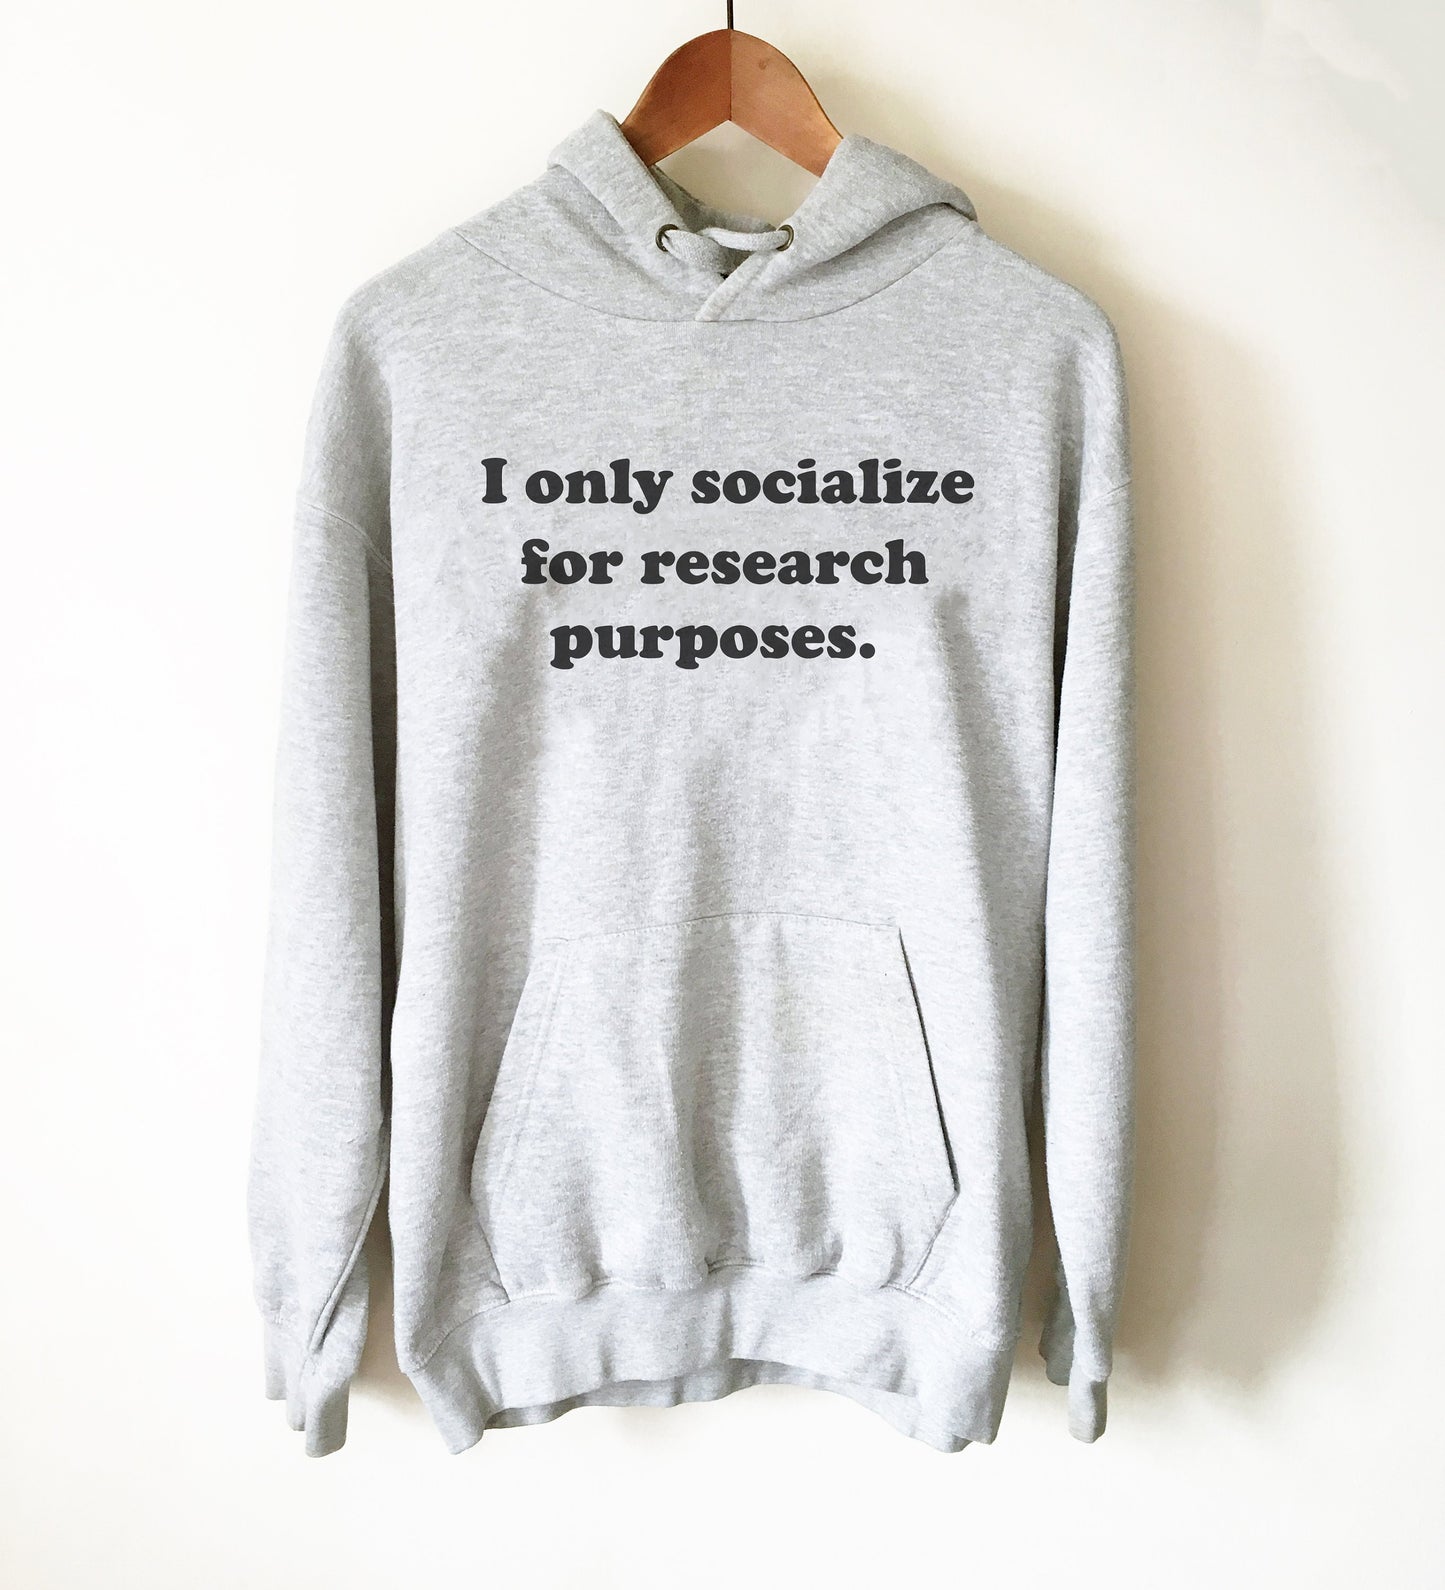 I Only Socialize For Research Purposes Hoodie - Psychologist T-Shirt, Psychologist Gift, Psychology Gifts, Psychology Student